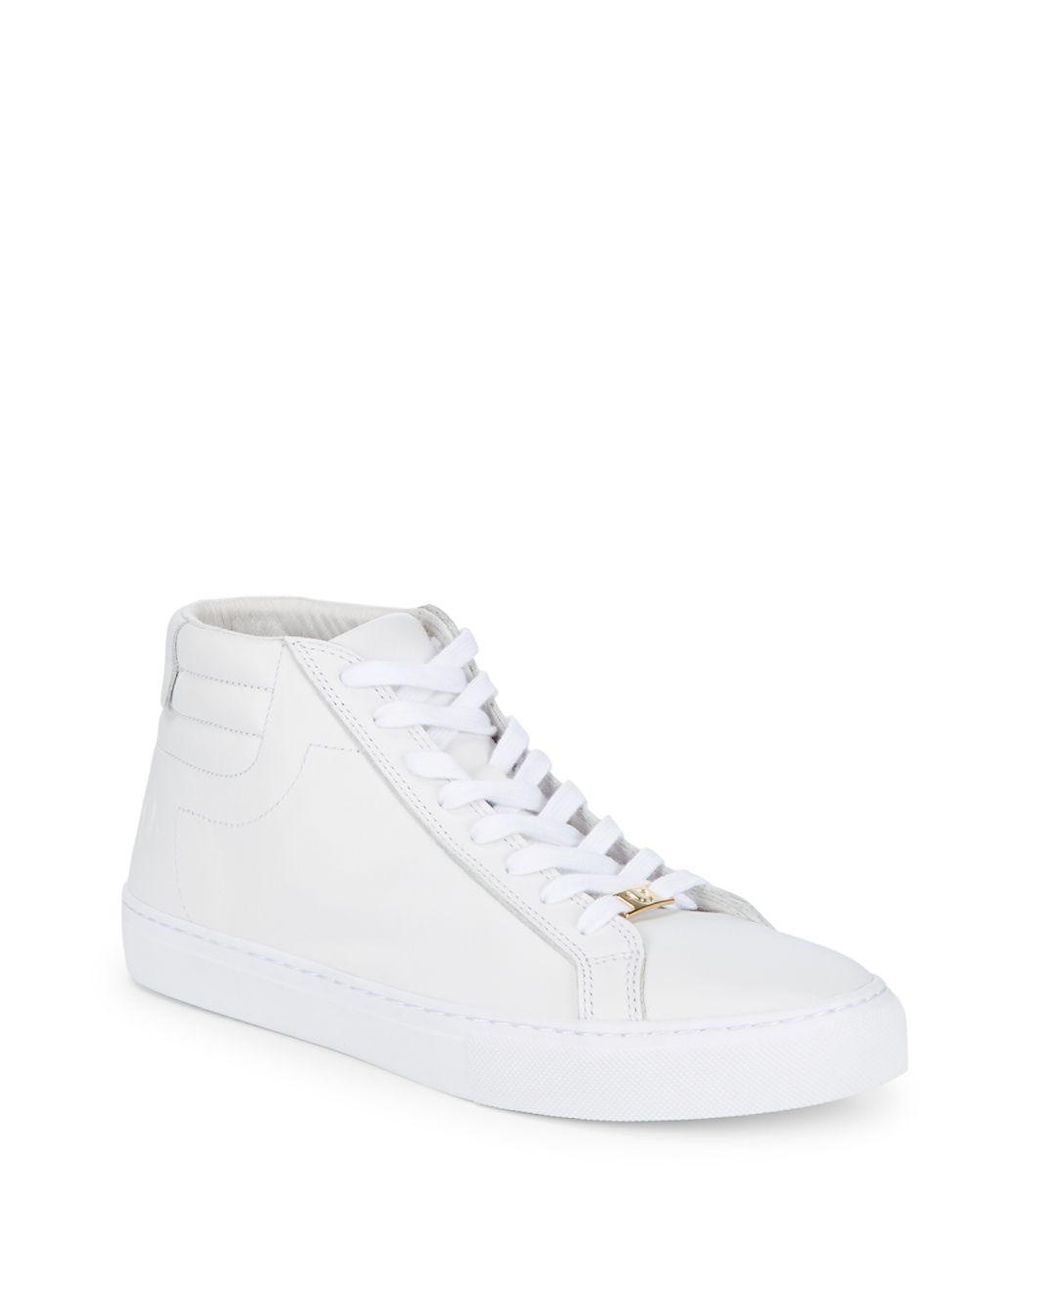 True Religion White Leather High Top Sneakers for Men | Lyst